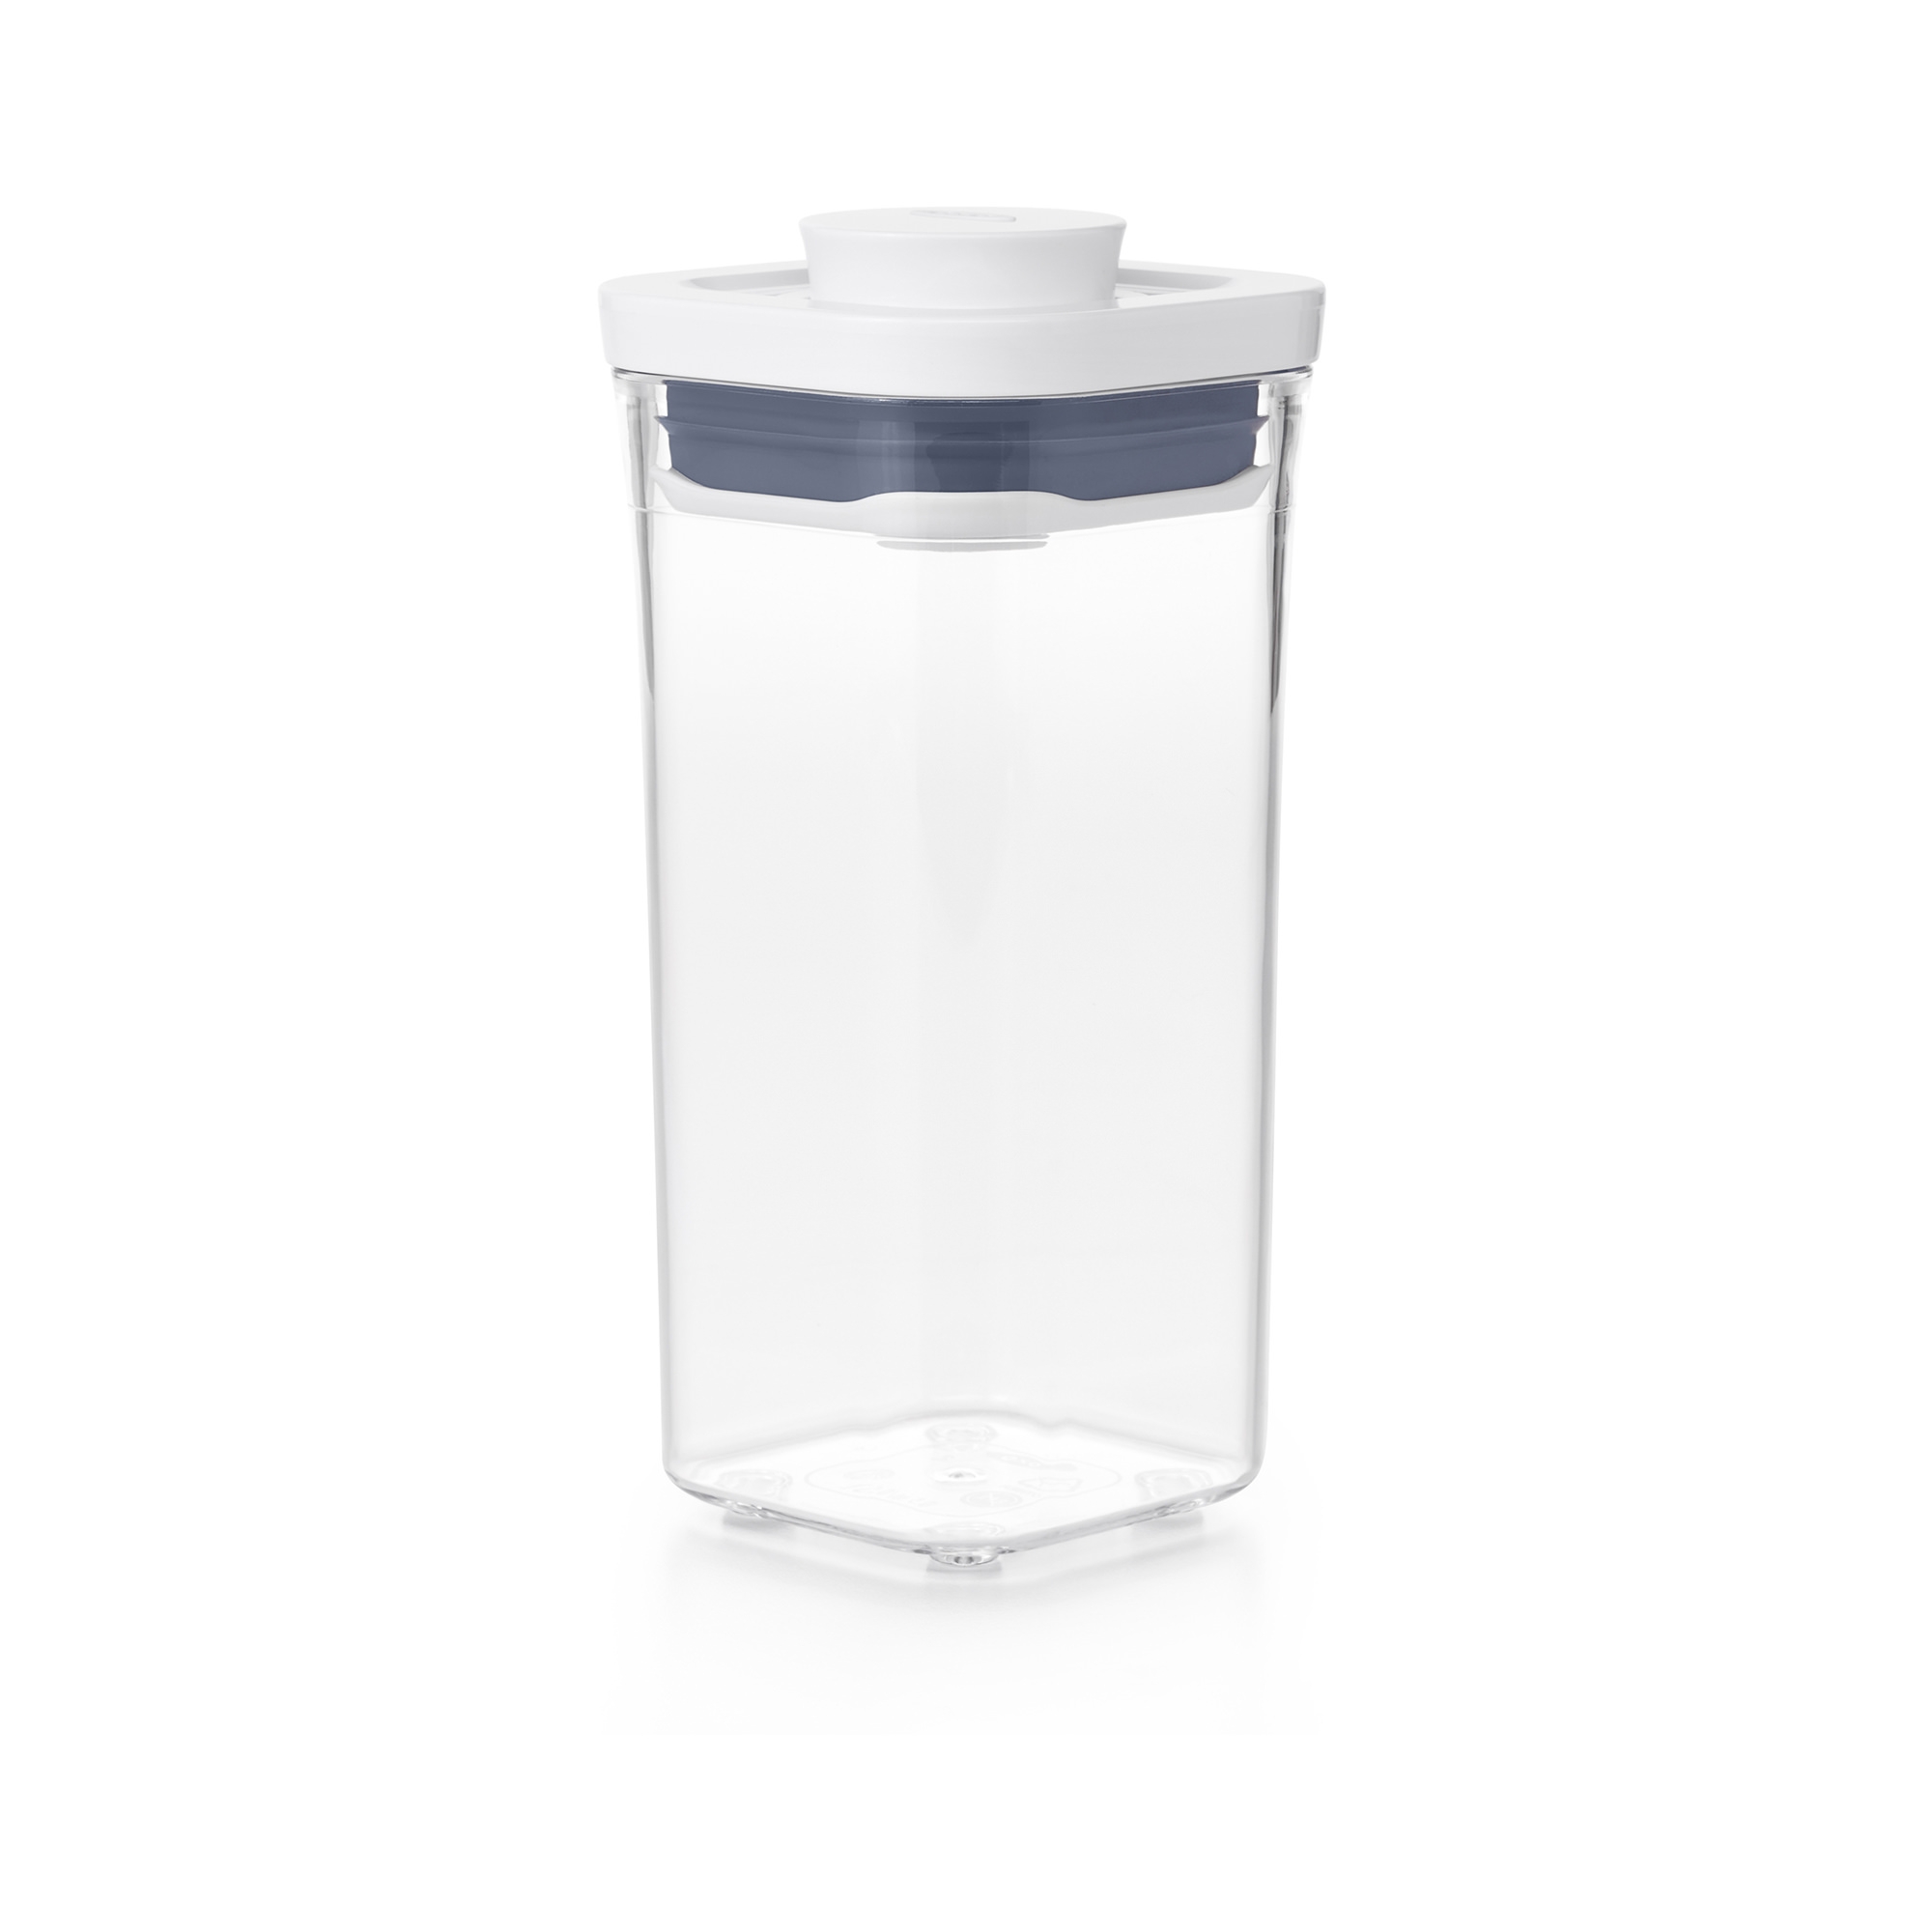 OXO Good Grips Square Pop 2.0 Container 500ml Image 2